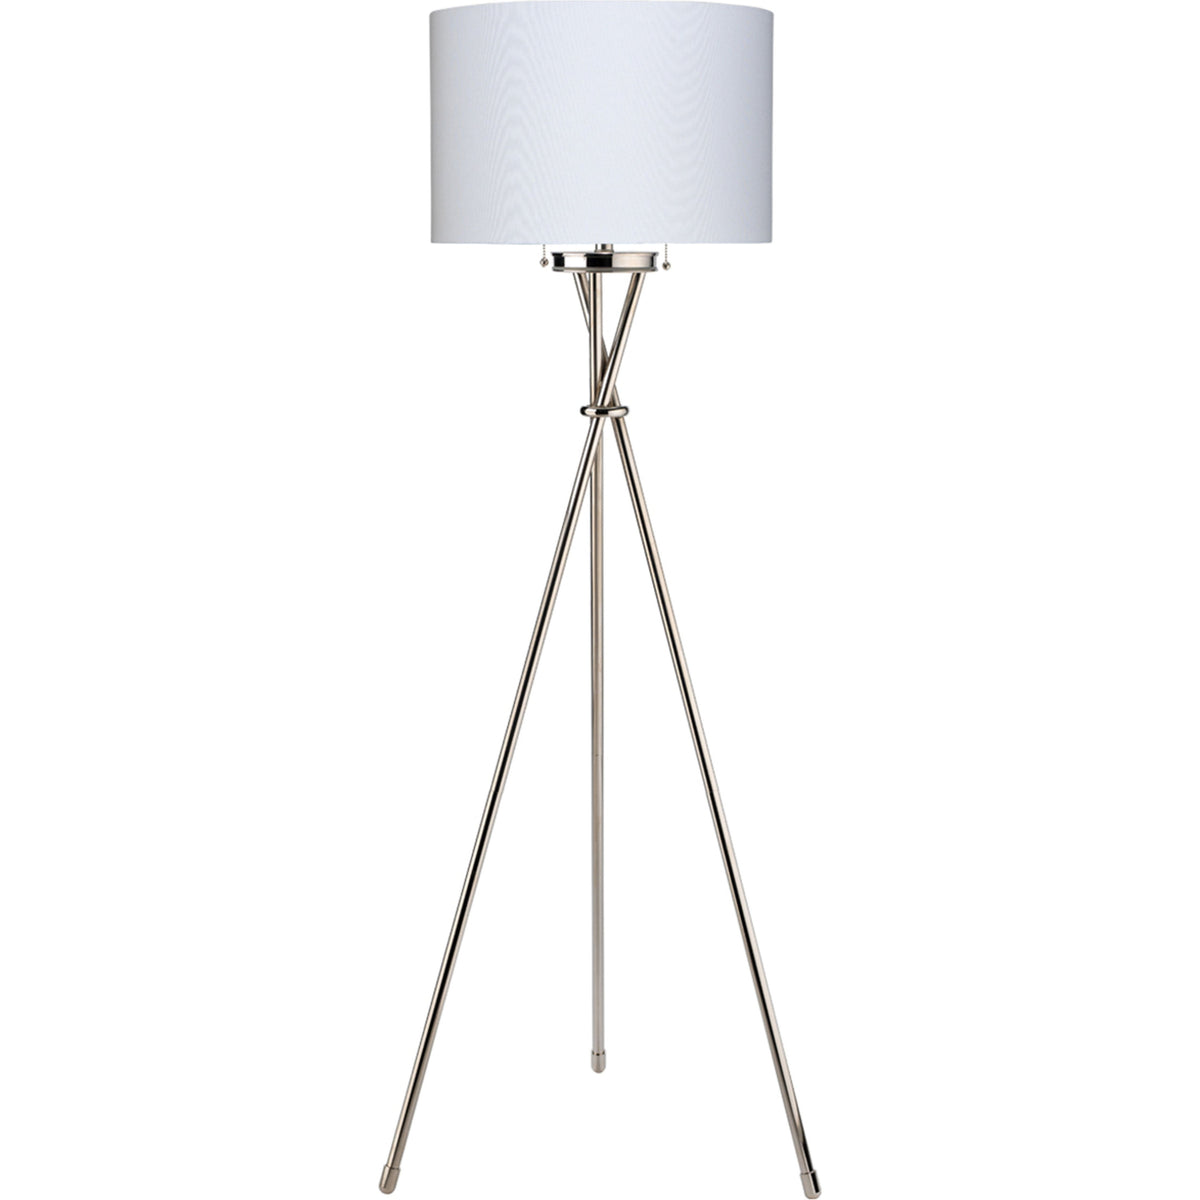 Jamie Young Company - LSMANNYNI - Manny Floor Lamp - Manny - Nickel